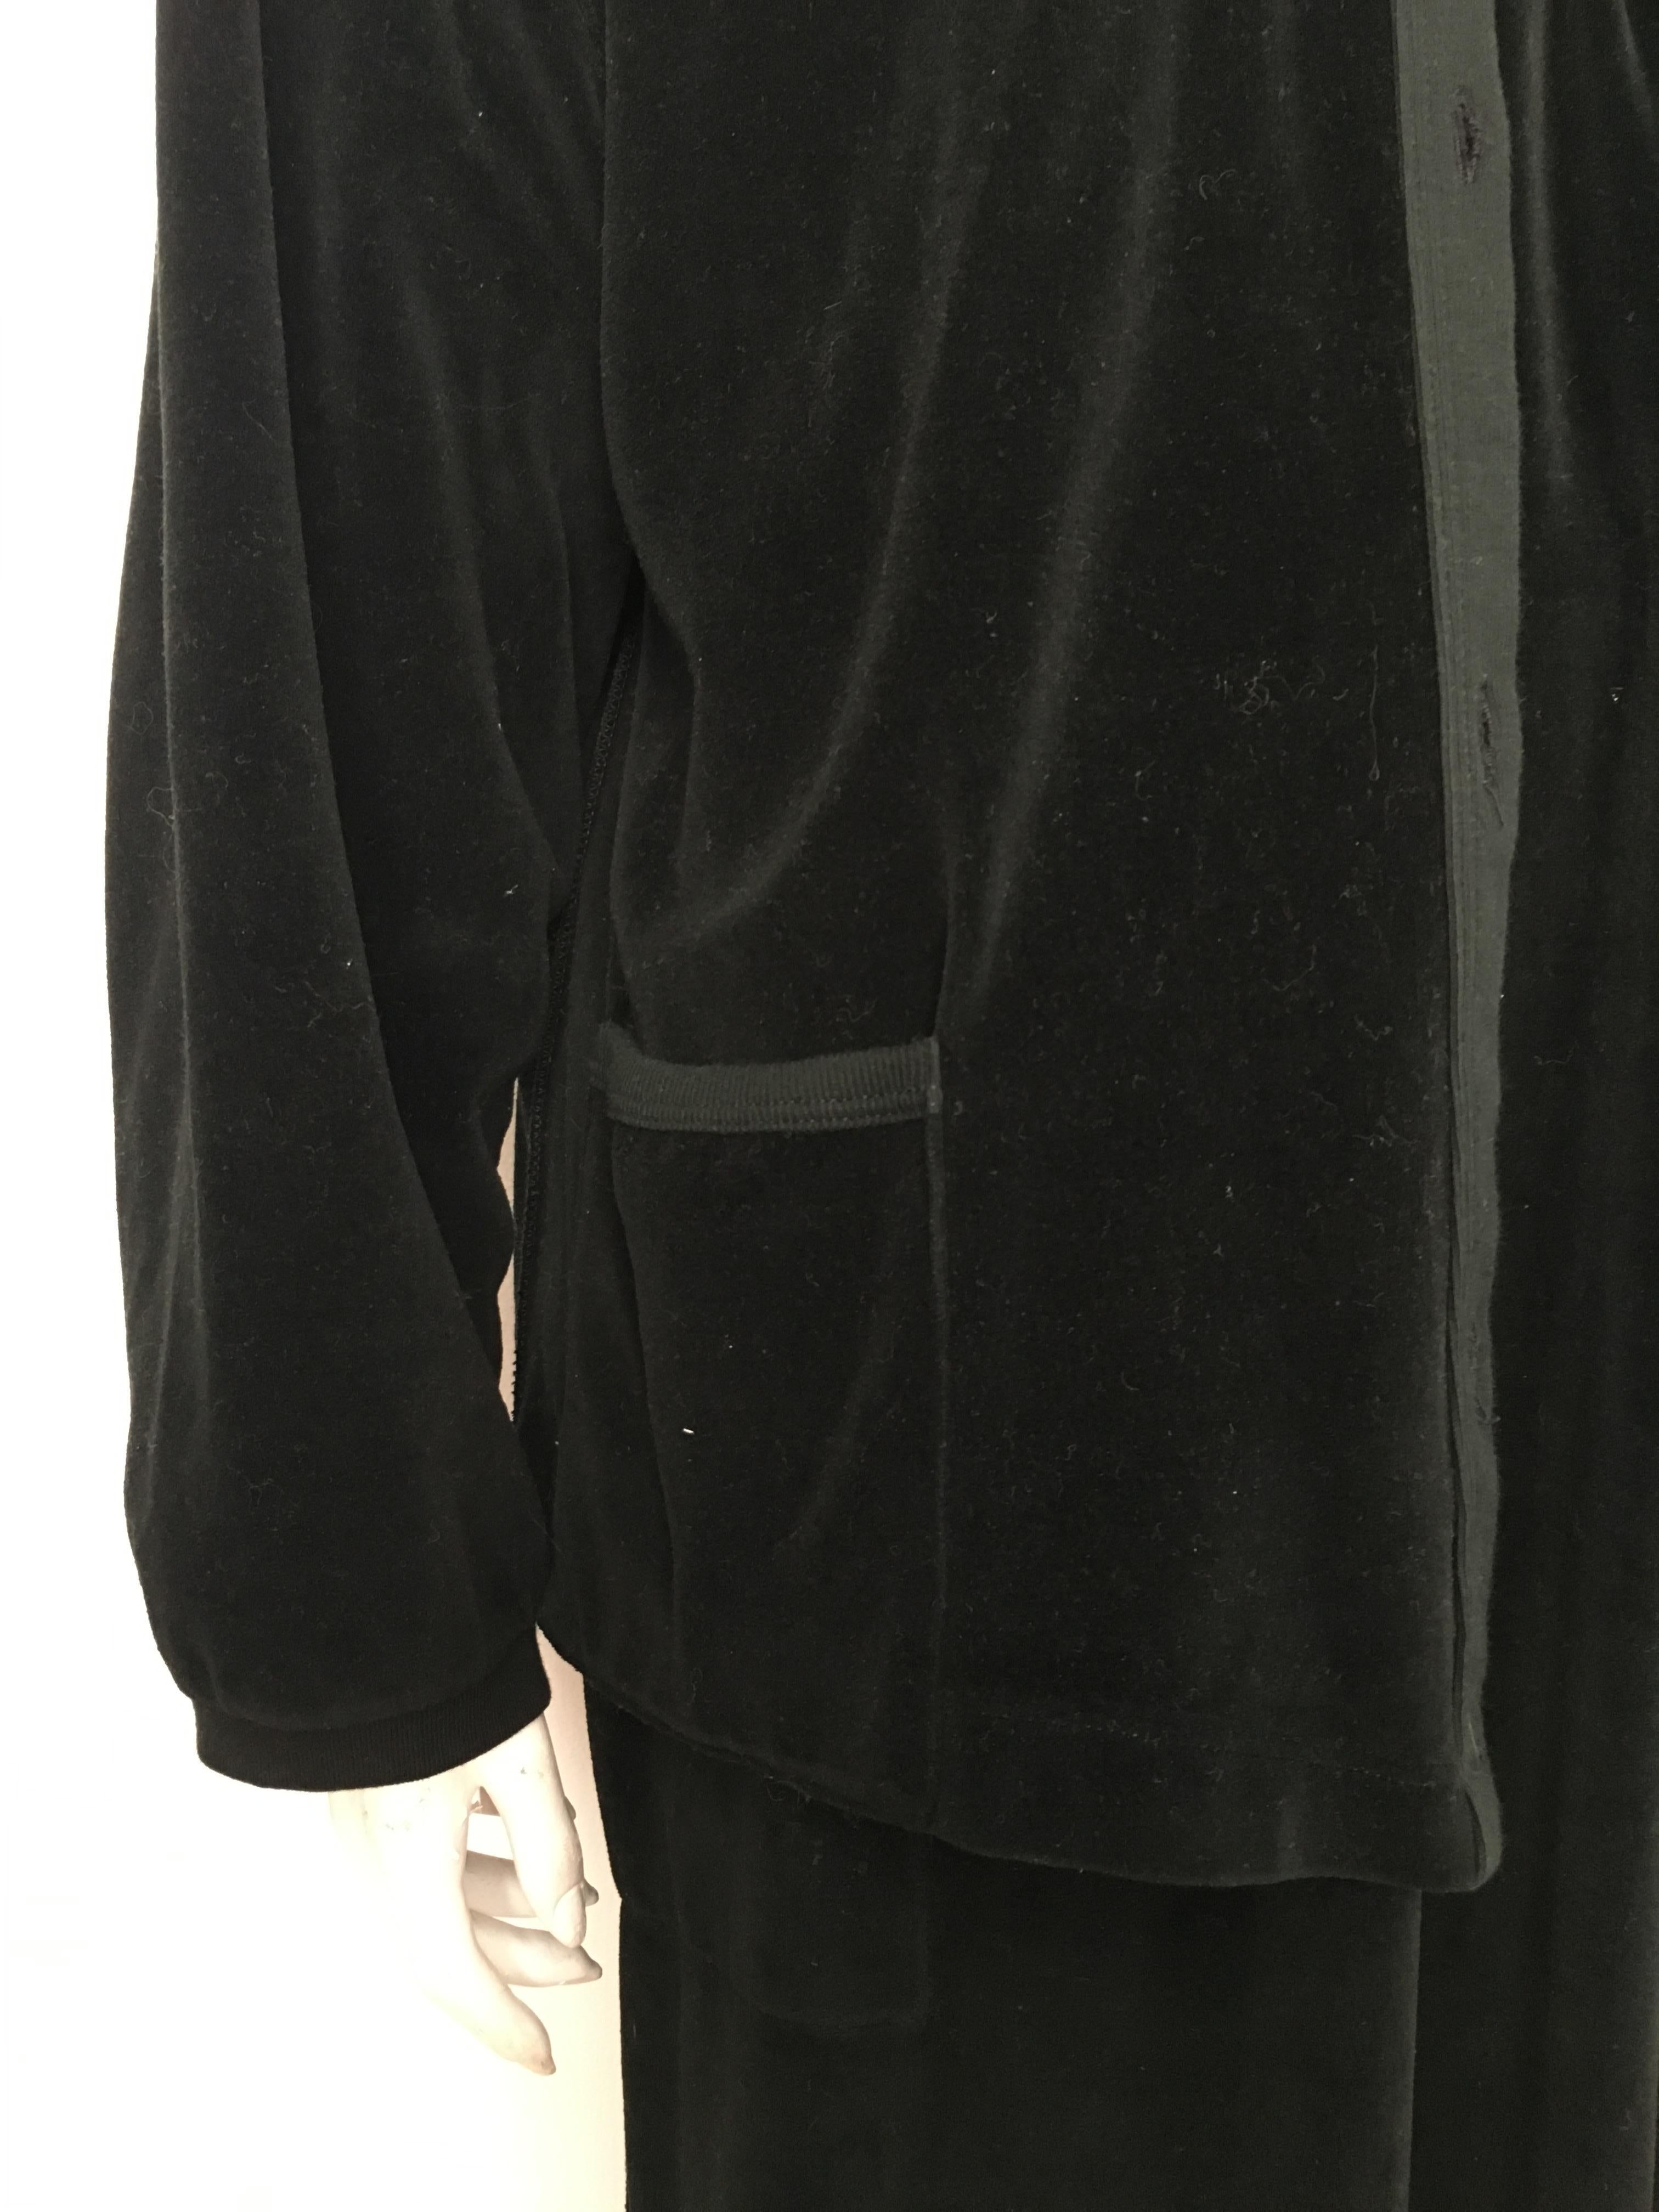 Sonia Rykiel 1980s Black Velour Dress with Pockets & Cardigan Size Large. For Sale 11